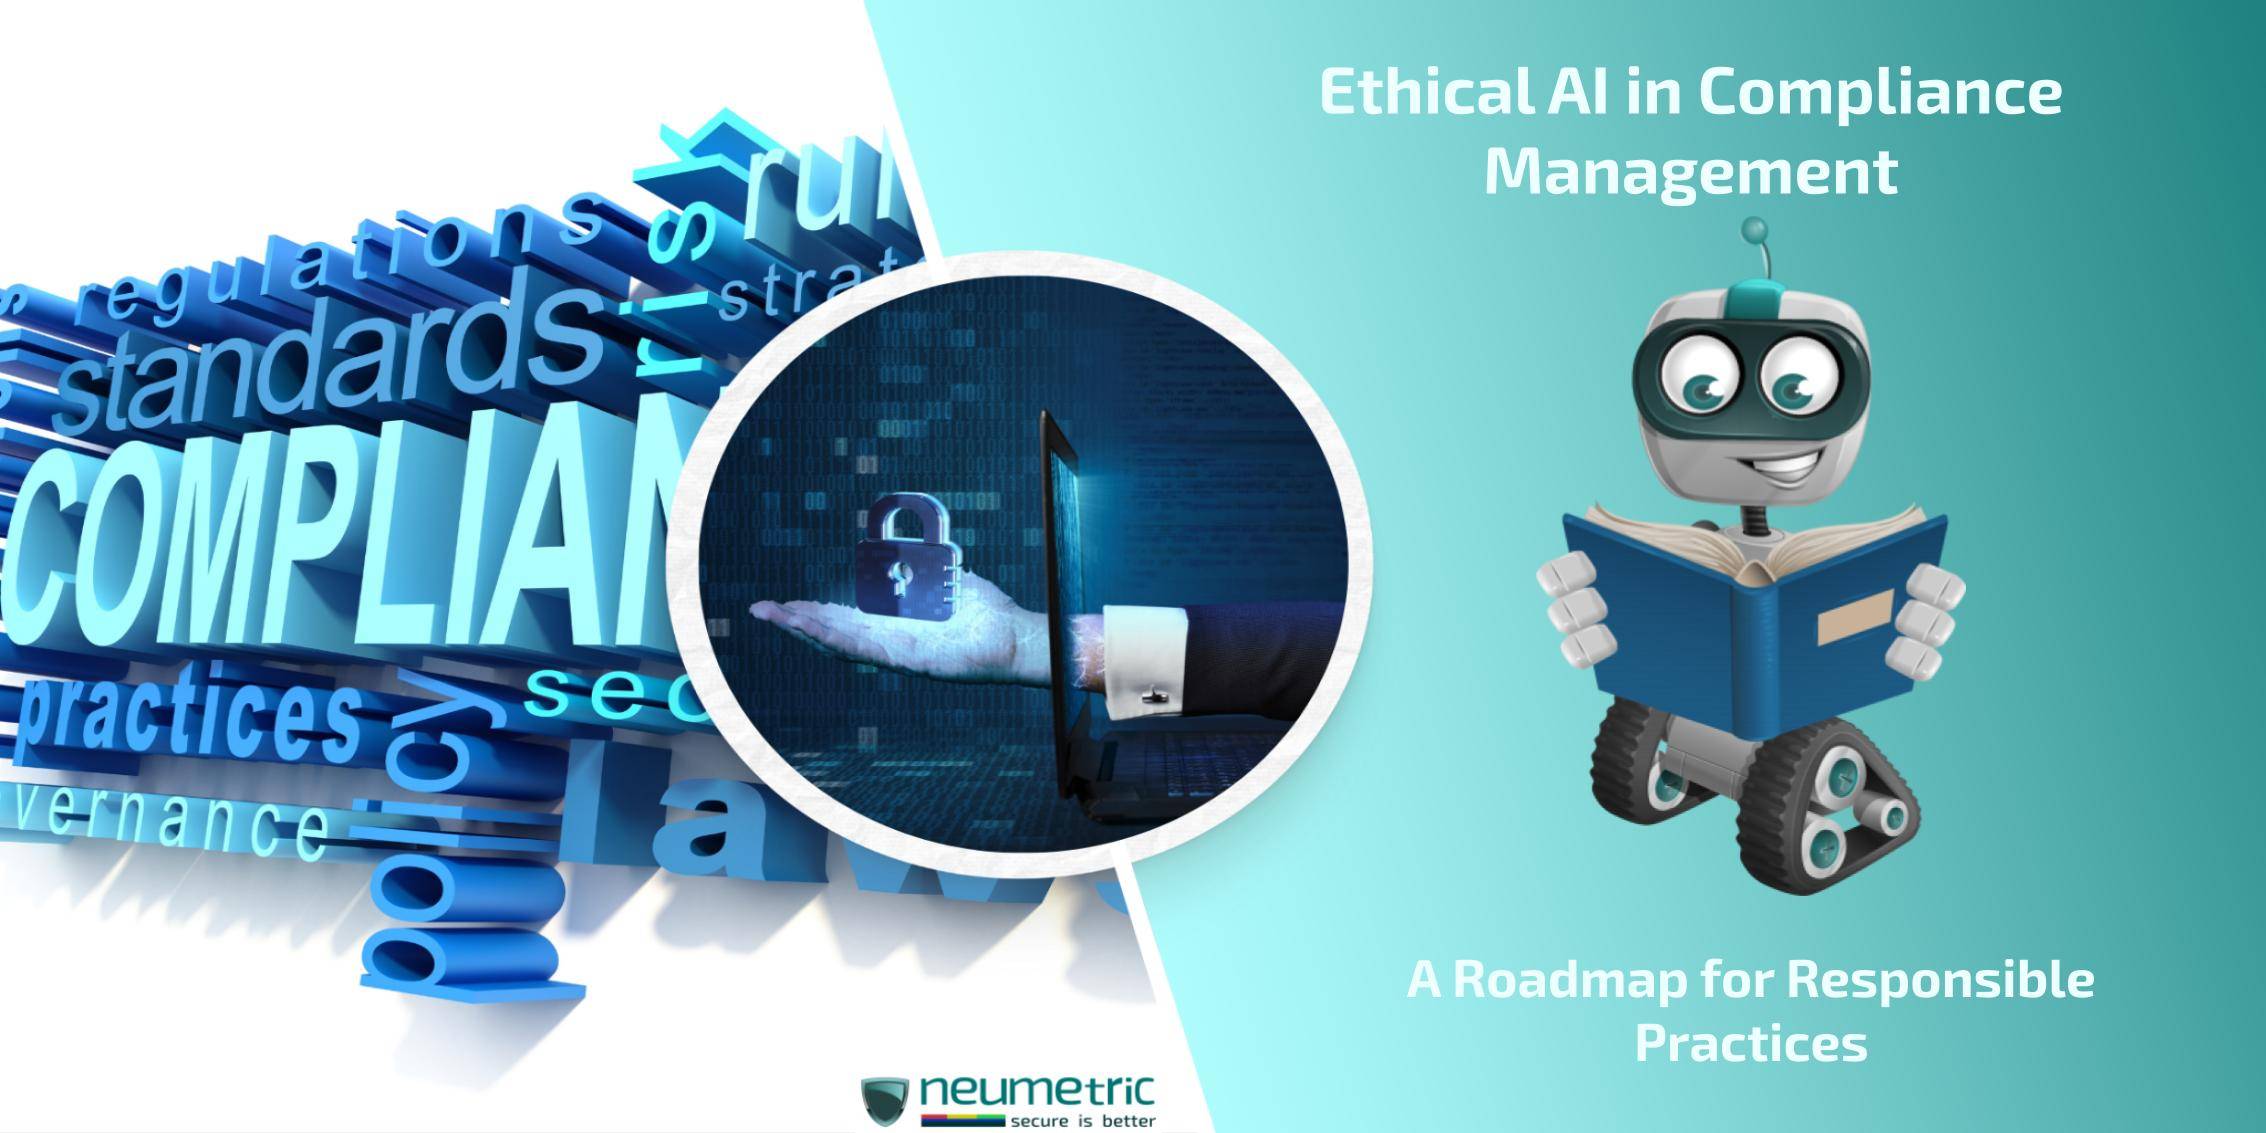 Ethical AI in Compliance Management: A Roadmap for Responsible Practices